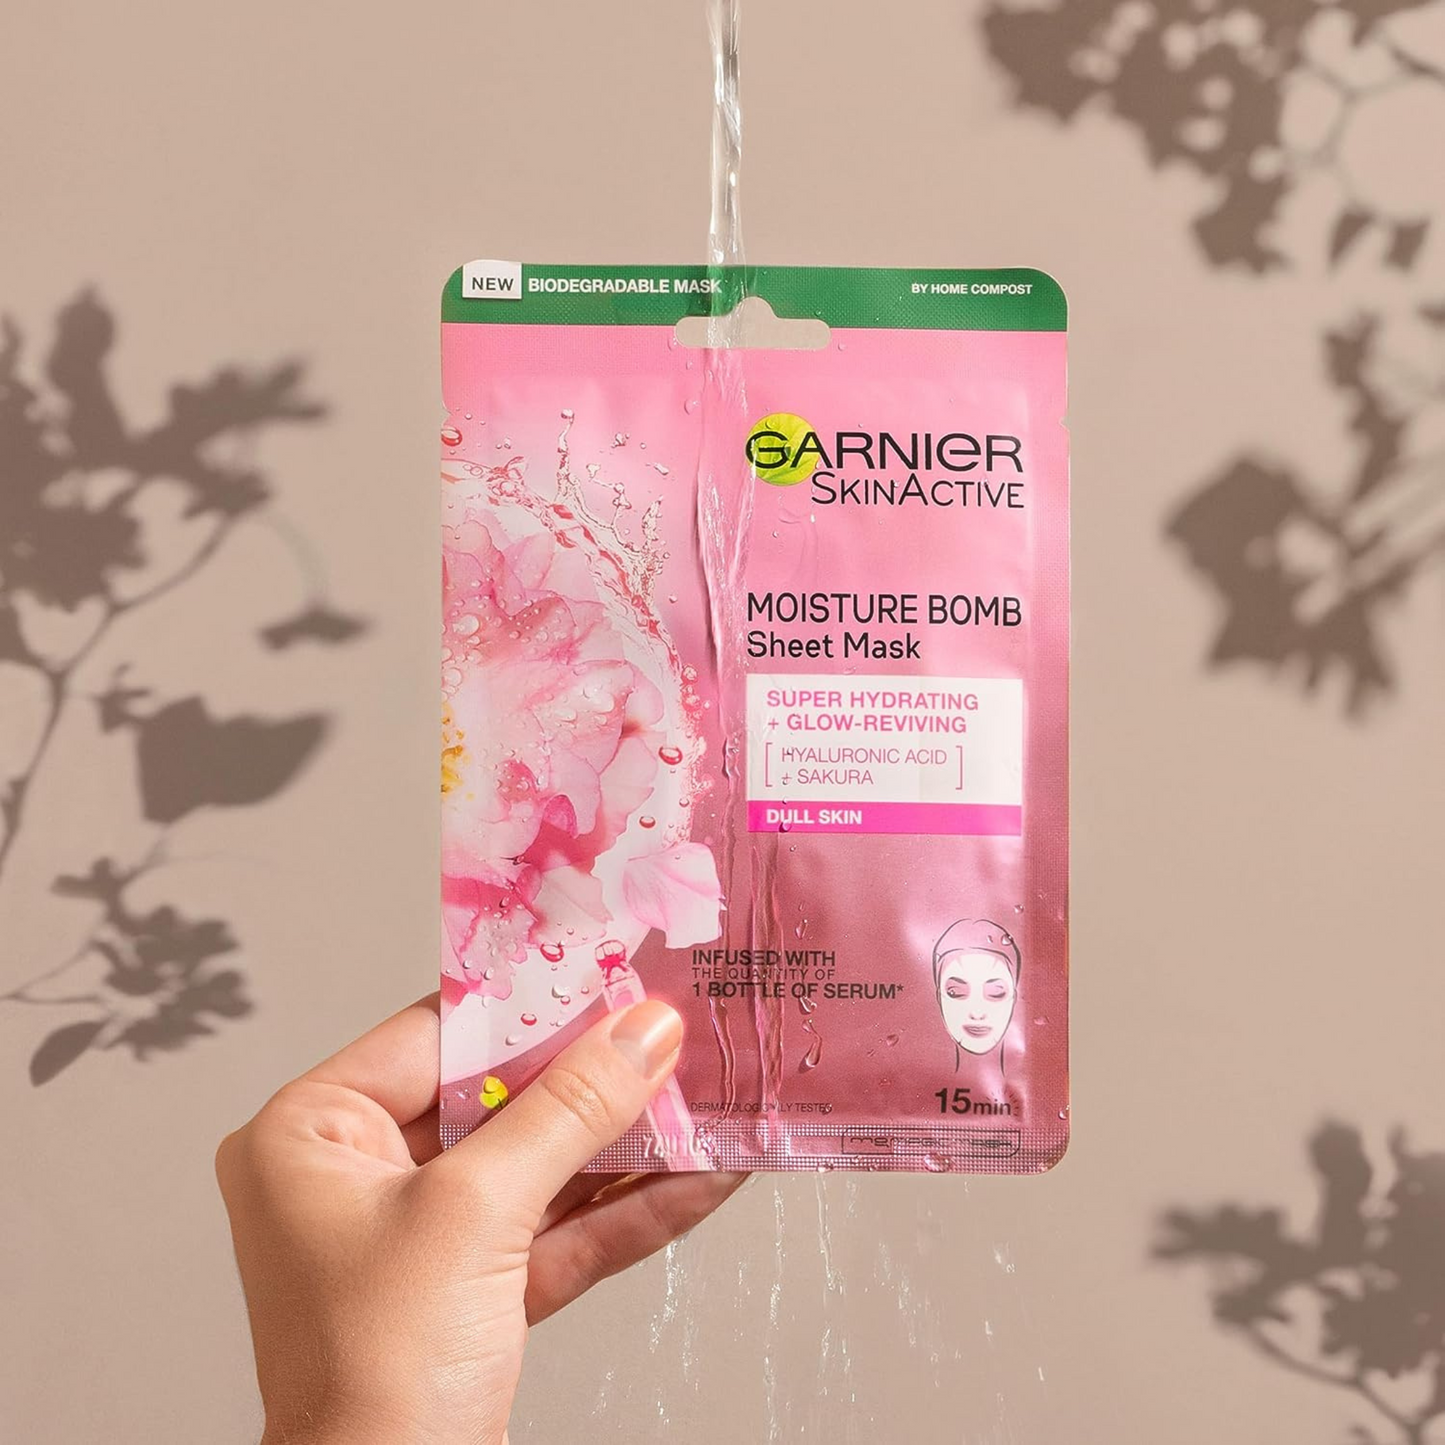 Garnier SkinActive Moisture Bomb is a super hydrating & revitalizing sheet mask. Contains Sakura plant extracts & hyaluronic acid, it leaves skin plump with moisture. Best imported foreign UK English British genuine authentic real skin care skincare premium beauty cheap price in Dhaka Chittagong Sylhet Bangladesh.